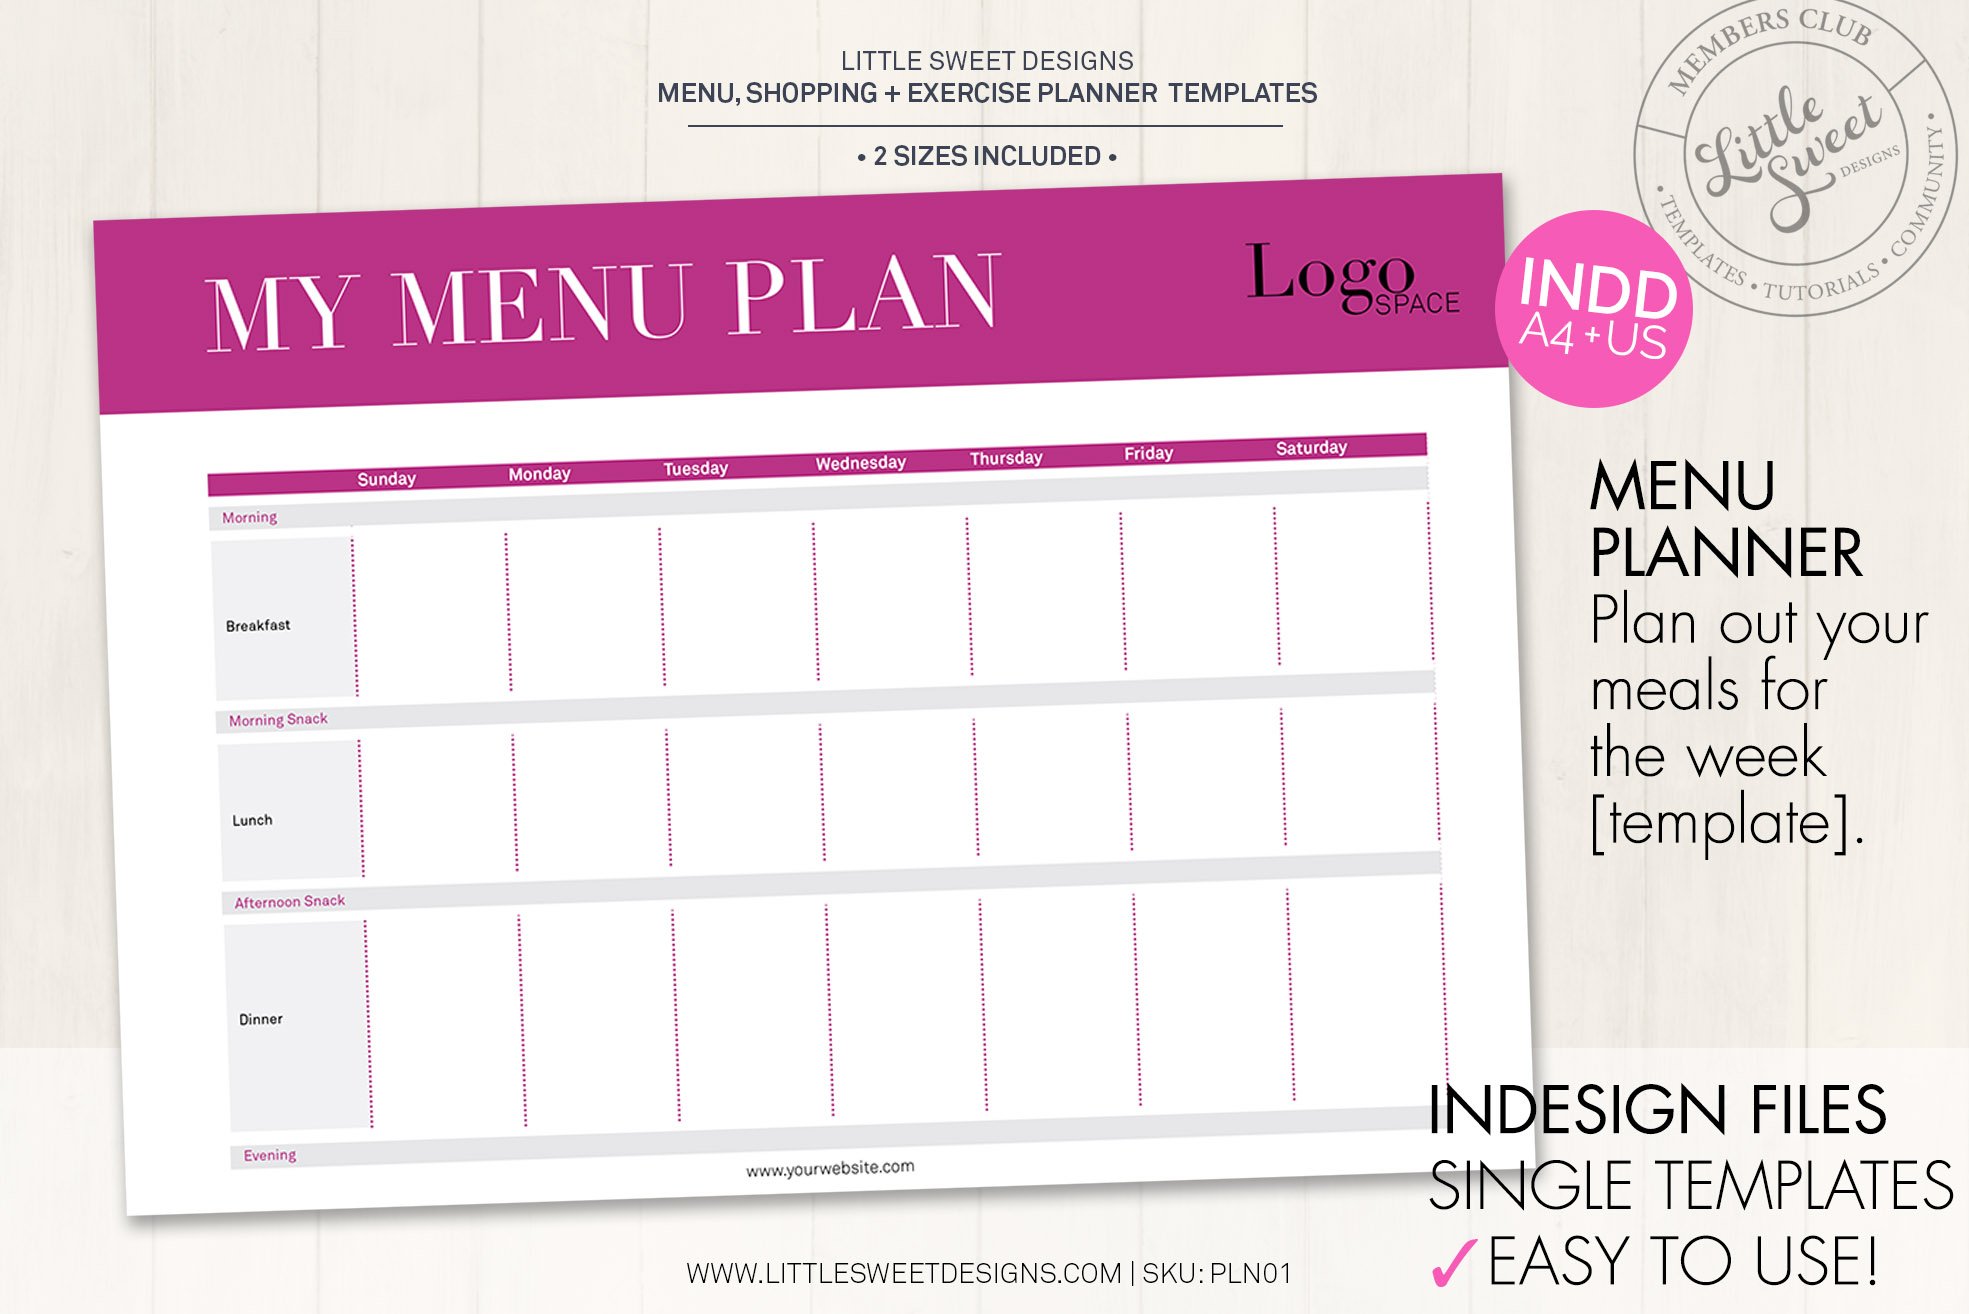 Menu, Shopping & Exercise Planner preview image.